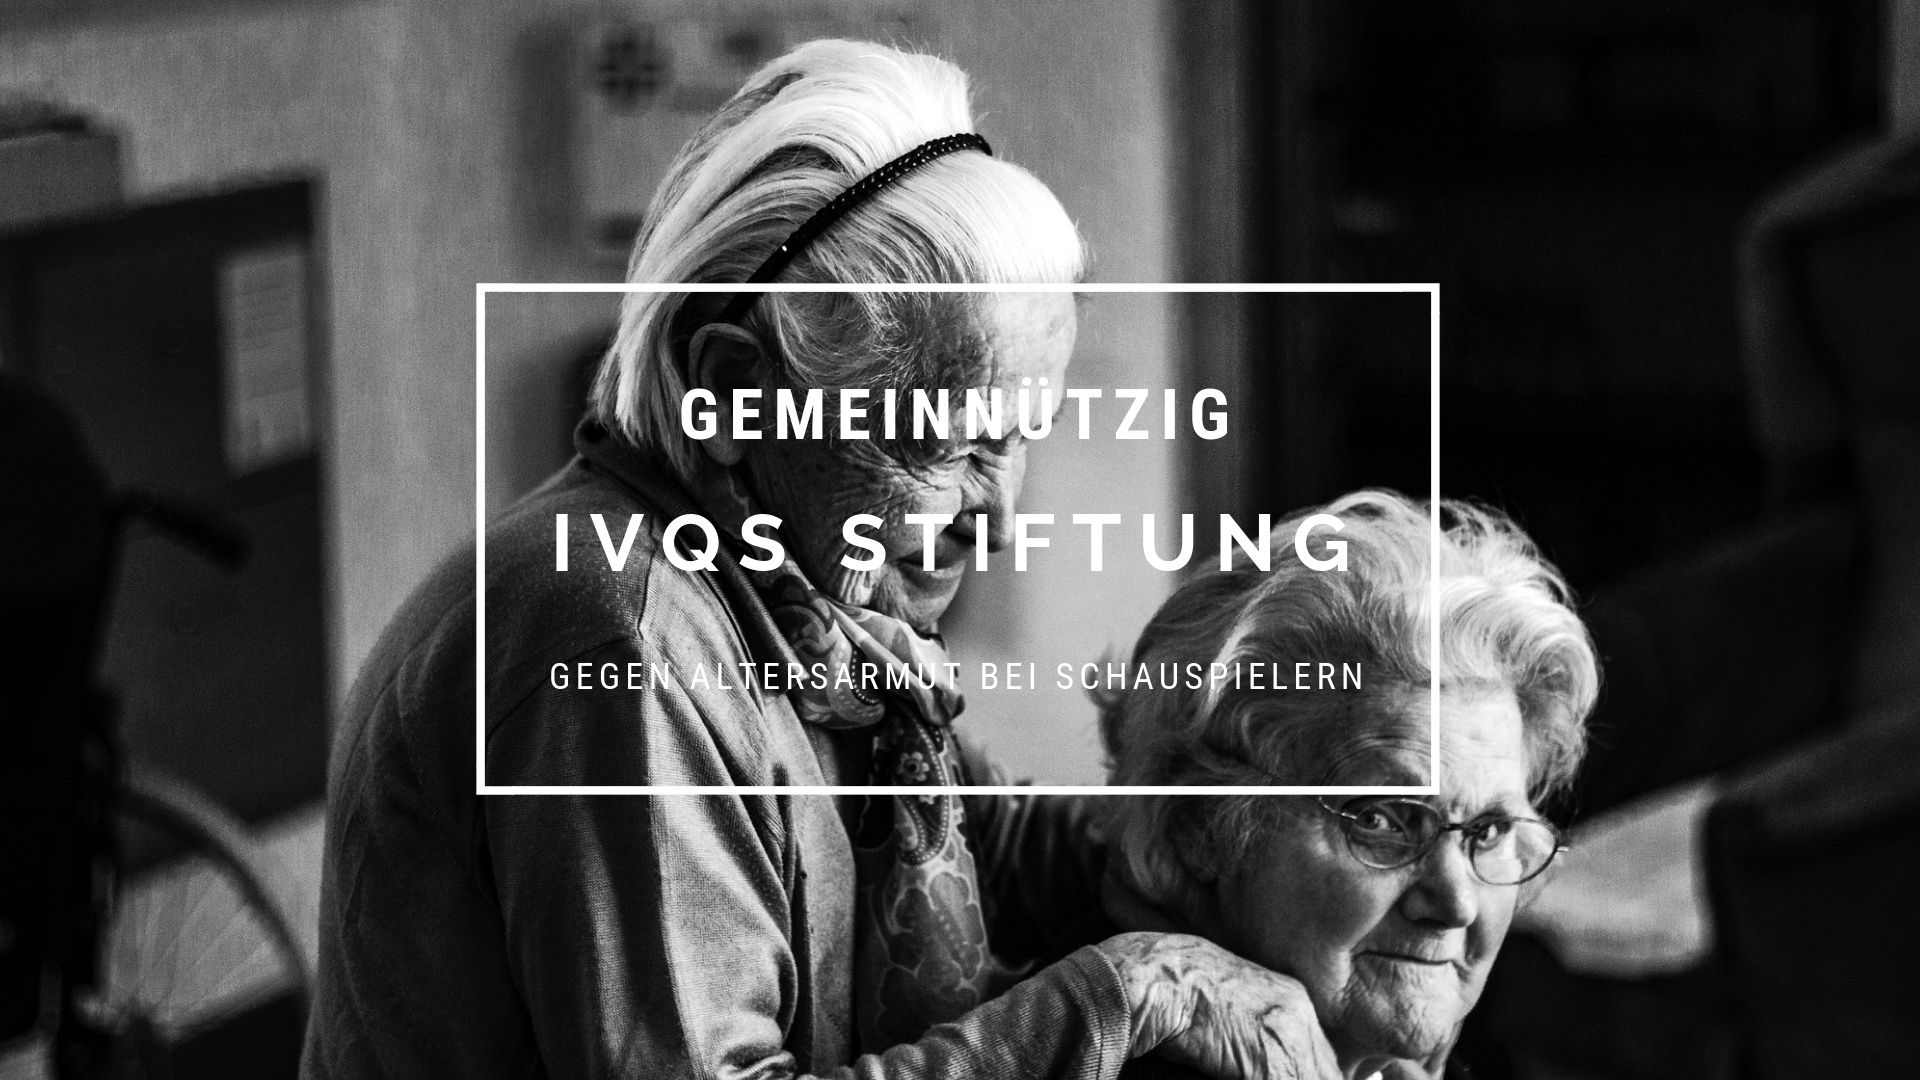 IVQS STIFTUNG